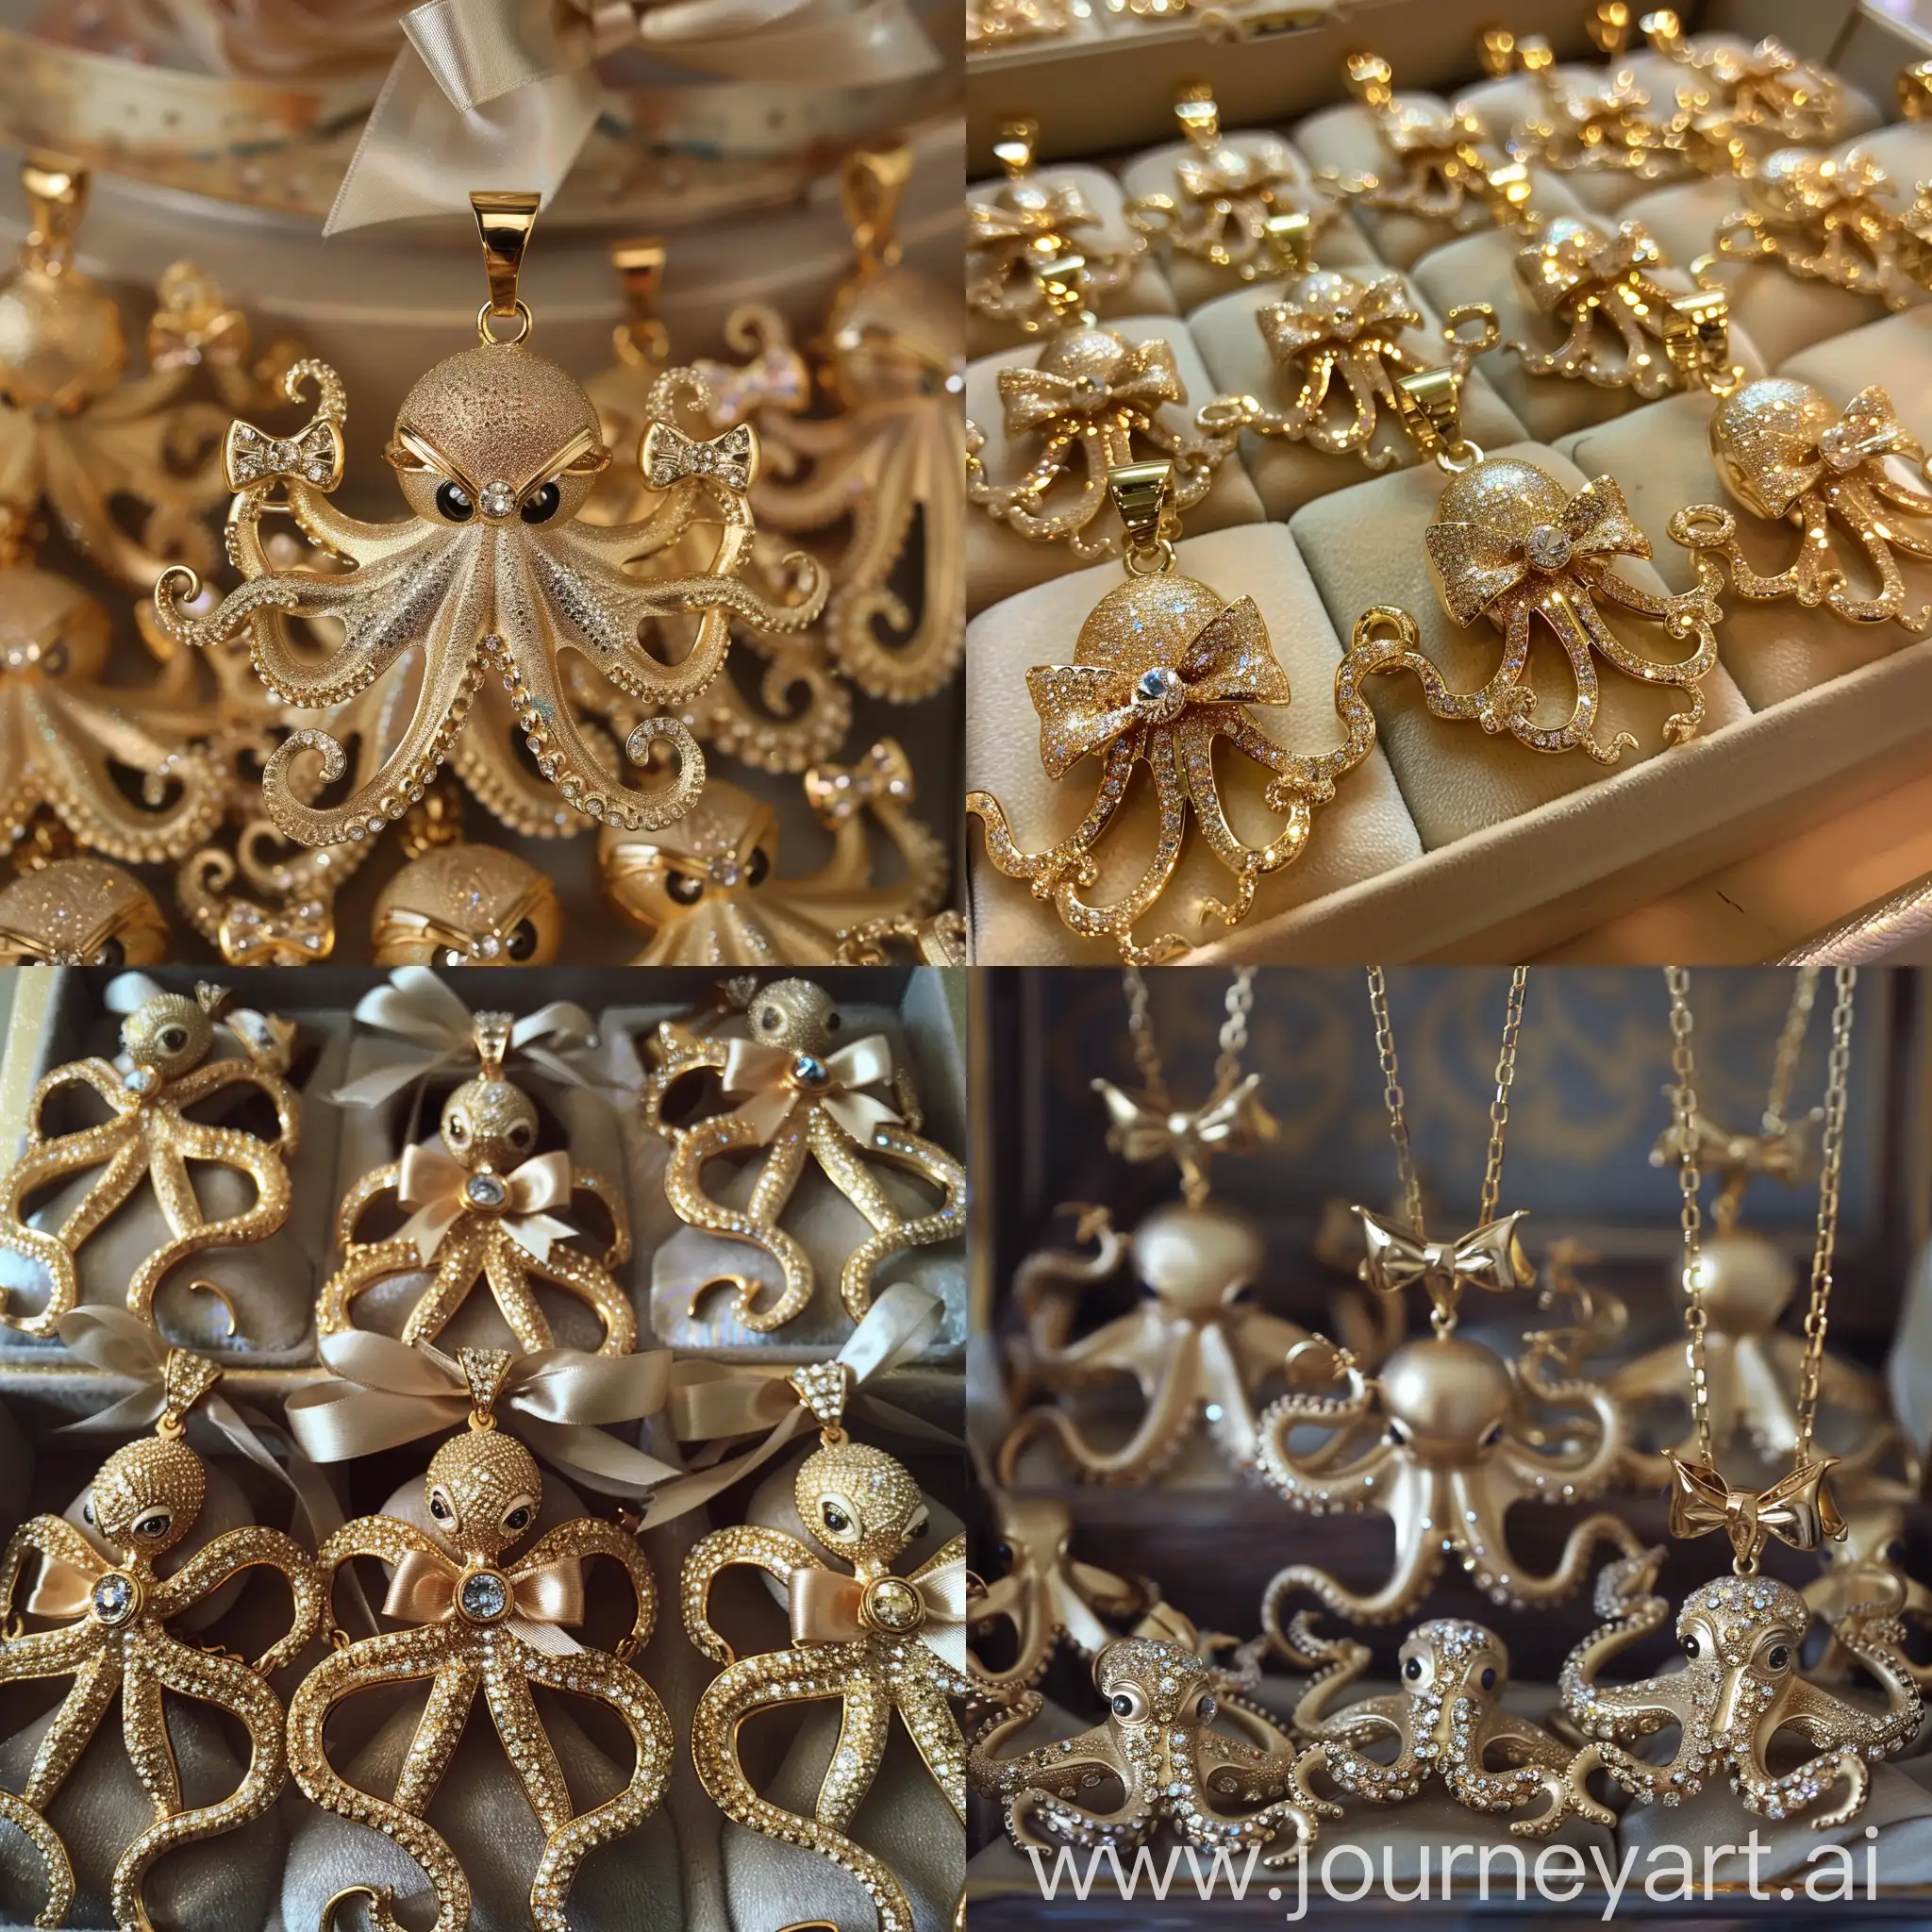 Exquisite-OctopusShaped-Gold-Pendants-with-Oceanic-Elegance